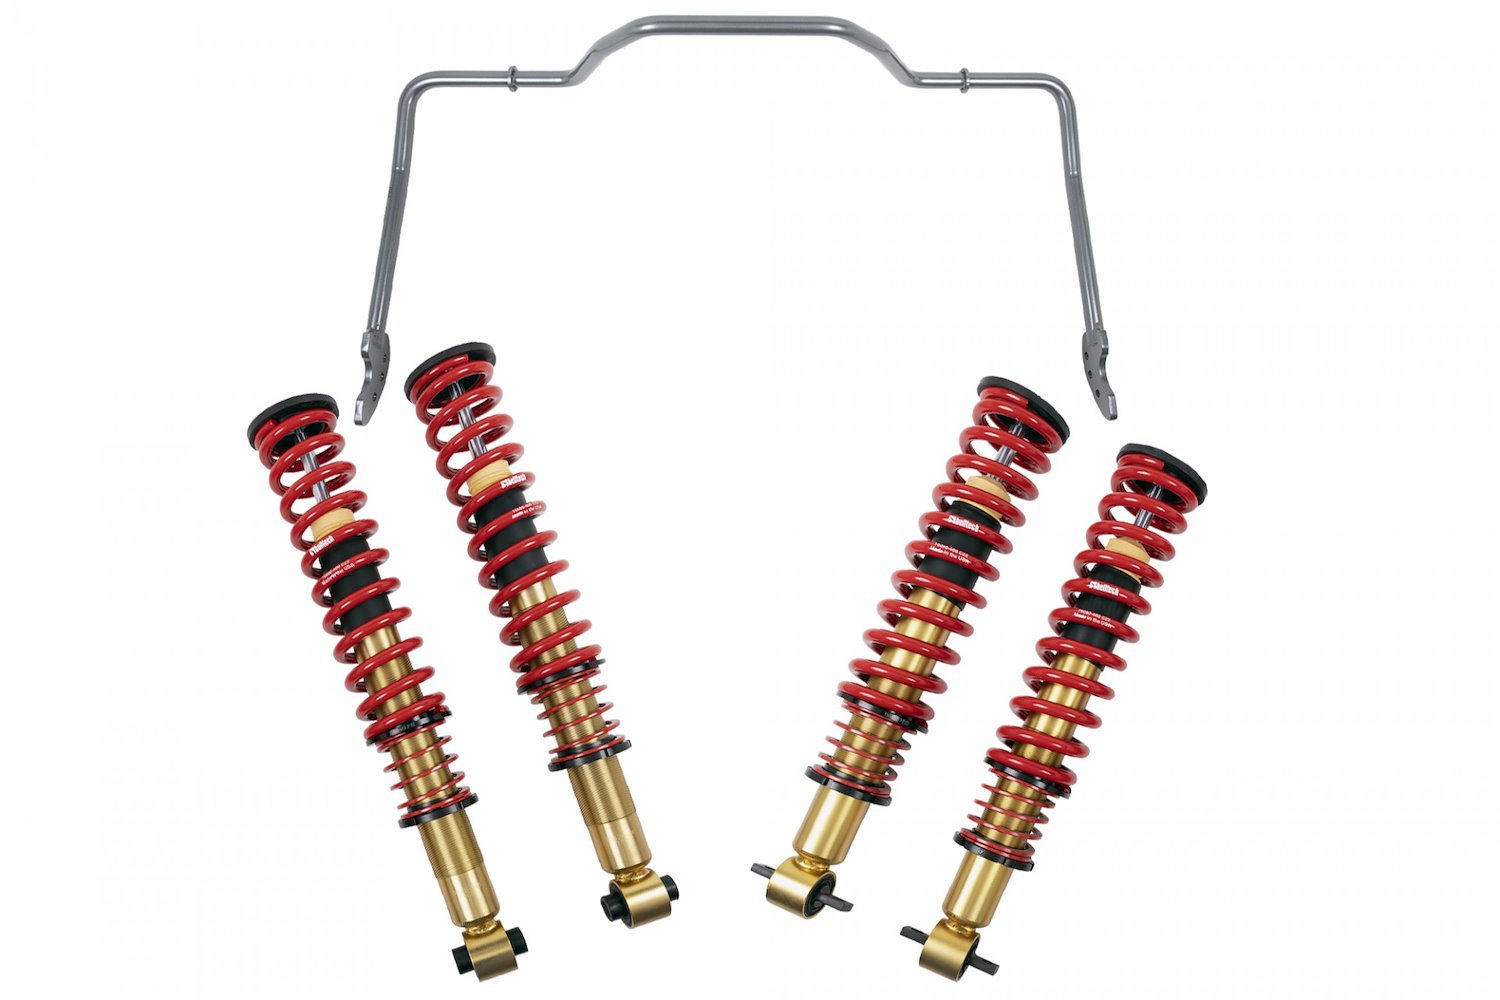 0-4 in. Suspension Coil-Over Lift Kit for Gen 6 Ford Bronco 4WD